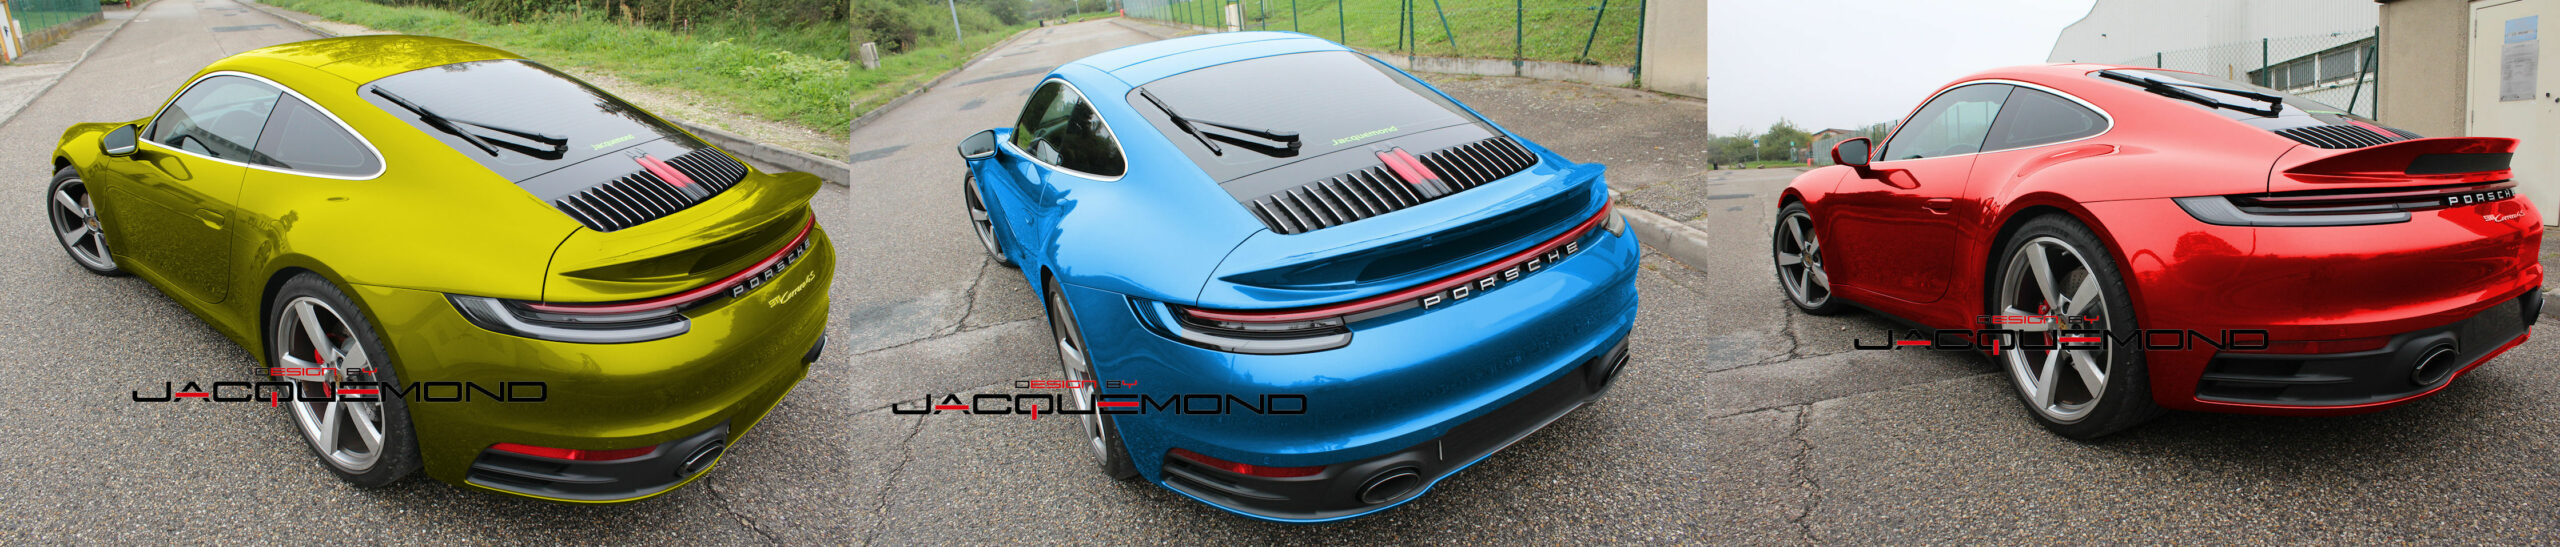 Duck tail rear wing spoiler for Porsche 992 by Jacquemond.com